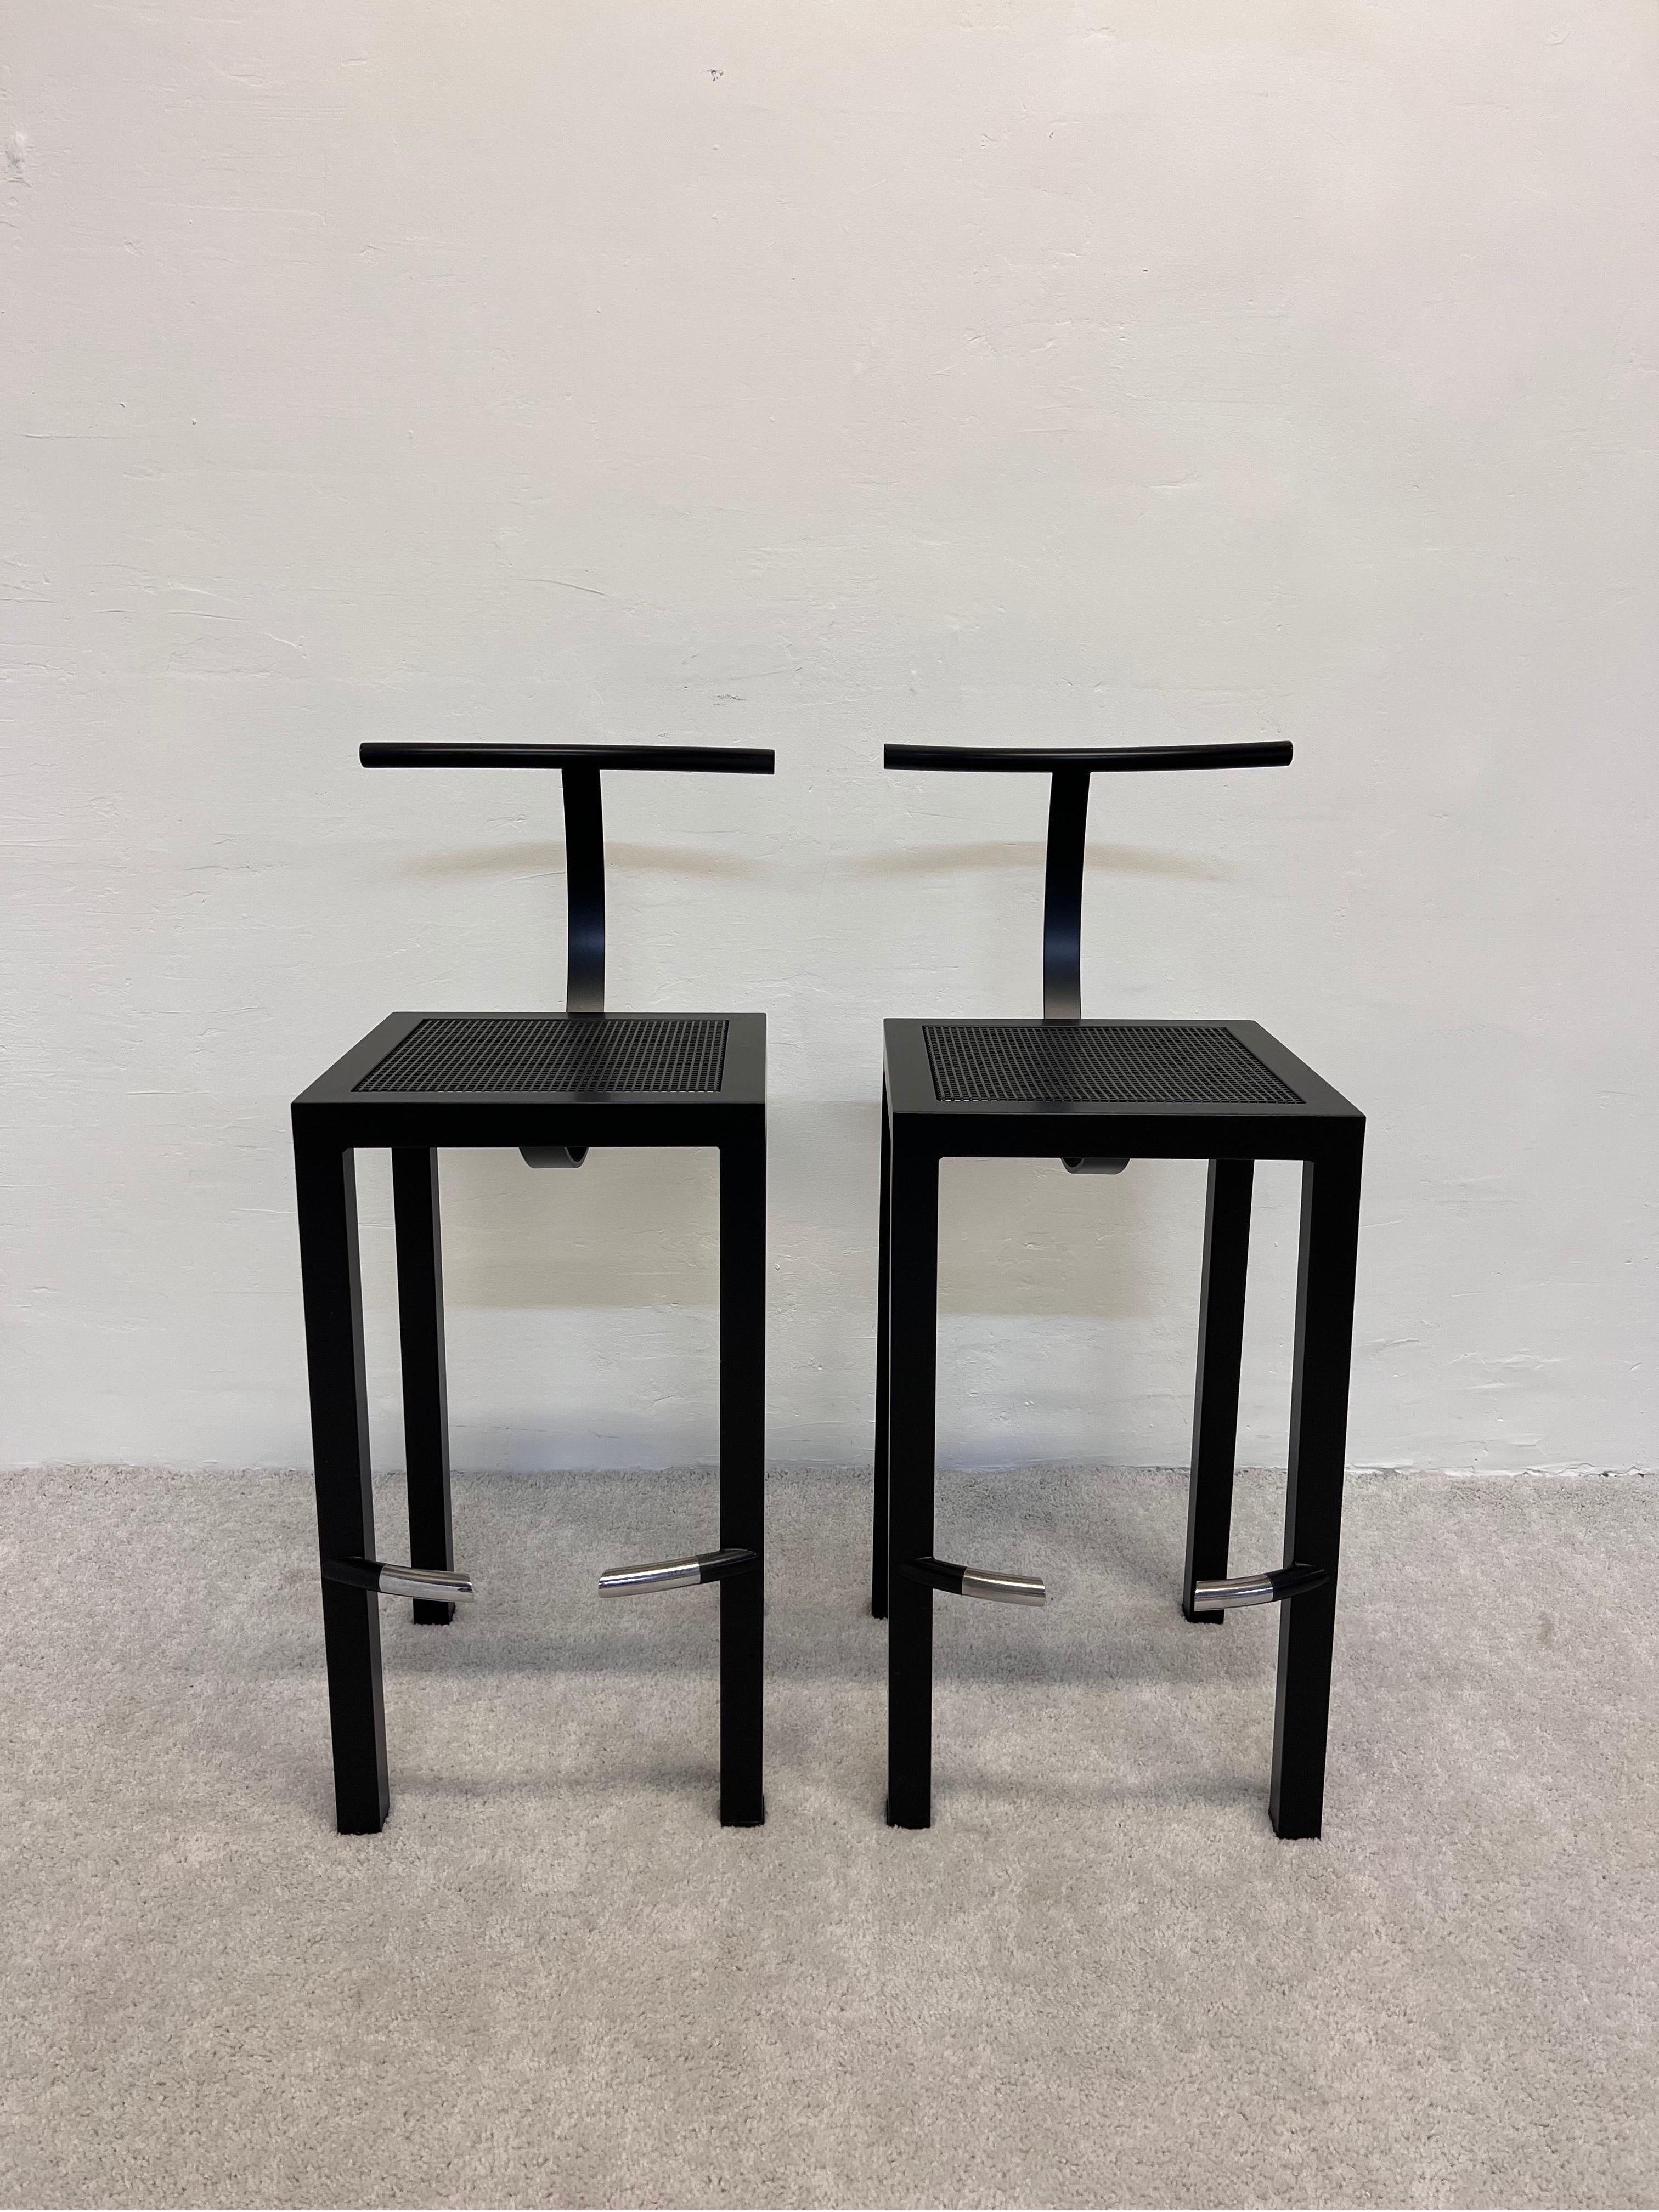 Pair of Postmodern satin black steel bar stools with perforated steel seats designed by Philippe Starck for his studio Aleph Ubik and manufactured by Driade, Italy, 1980s. Chairs have been professionally refinished in satin black.